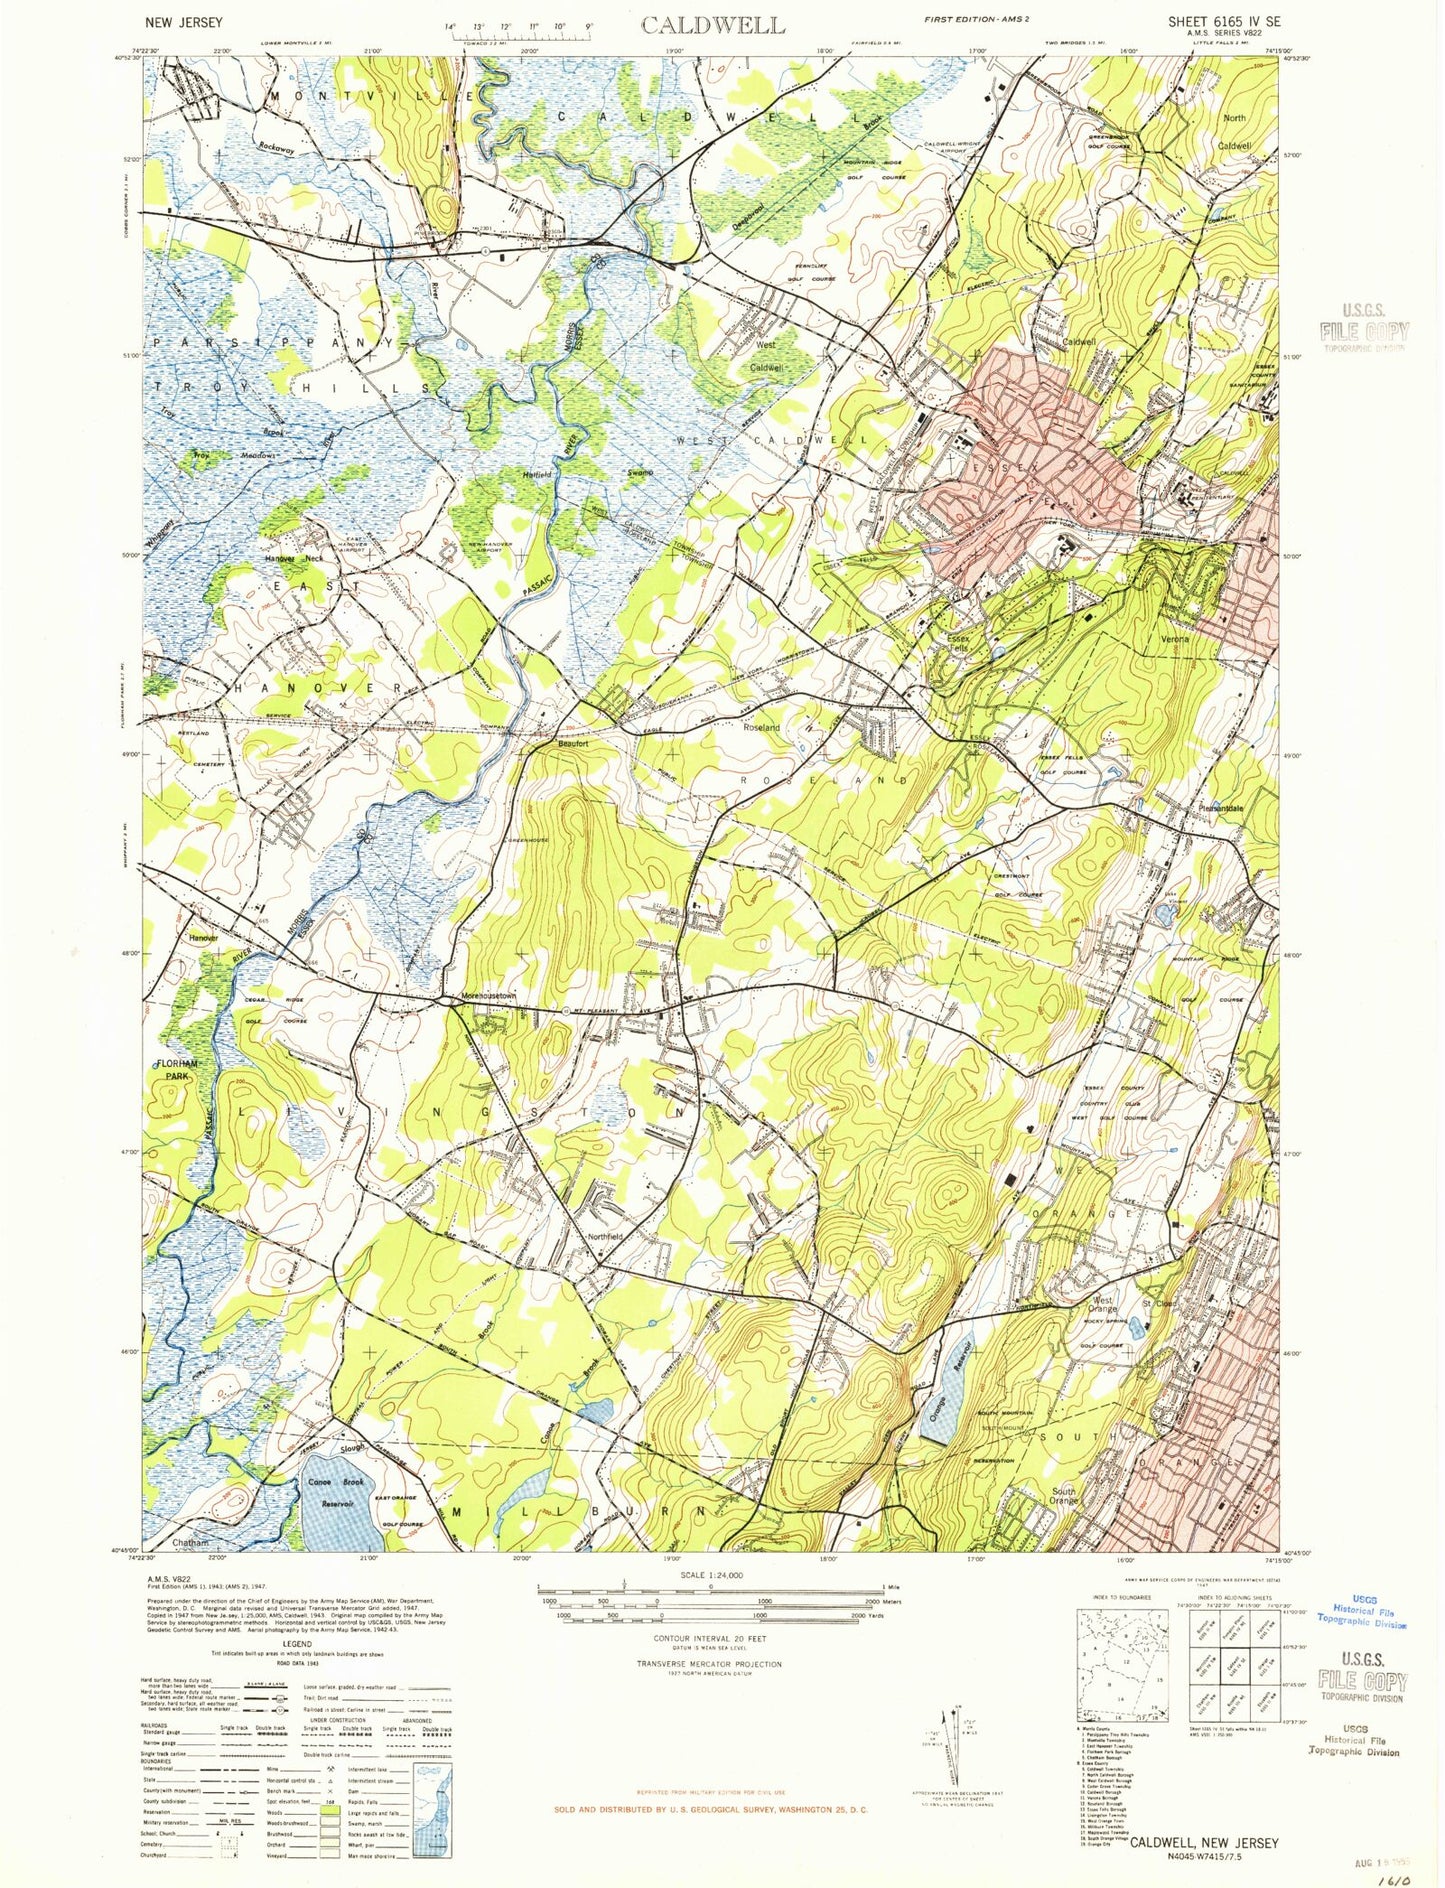 Classic USGS Caldwell New Jersey 7.5'x7.5' Topo Map Image